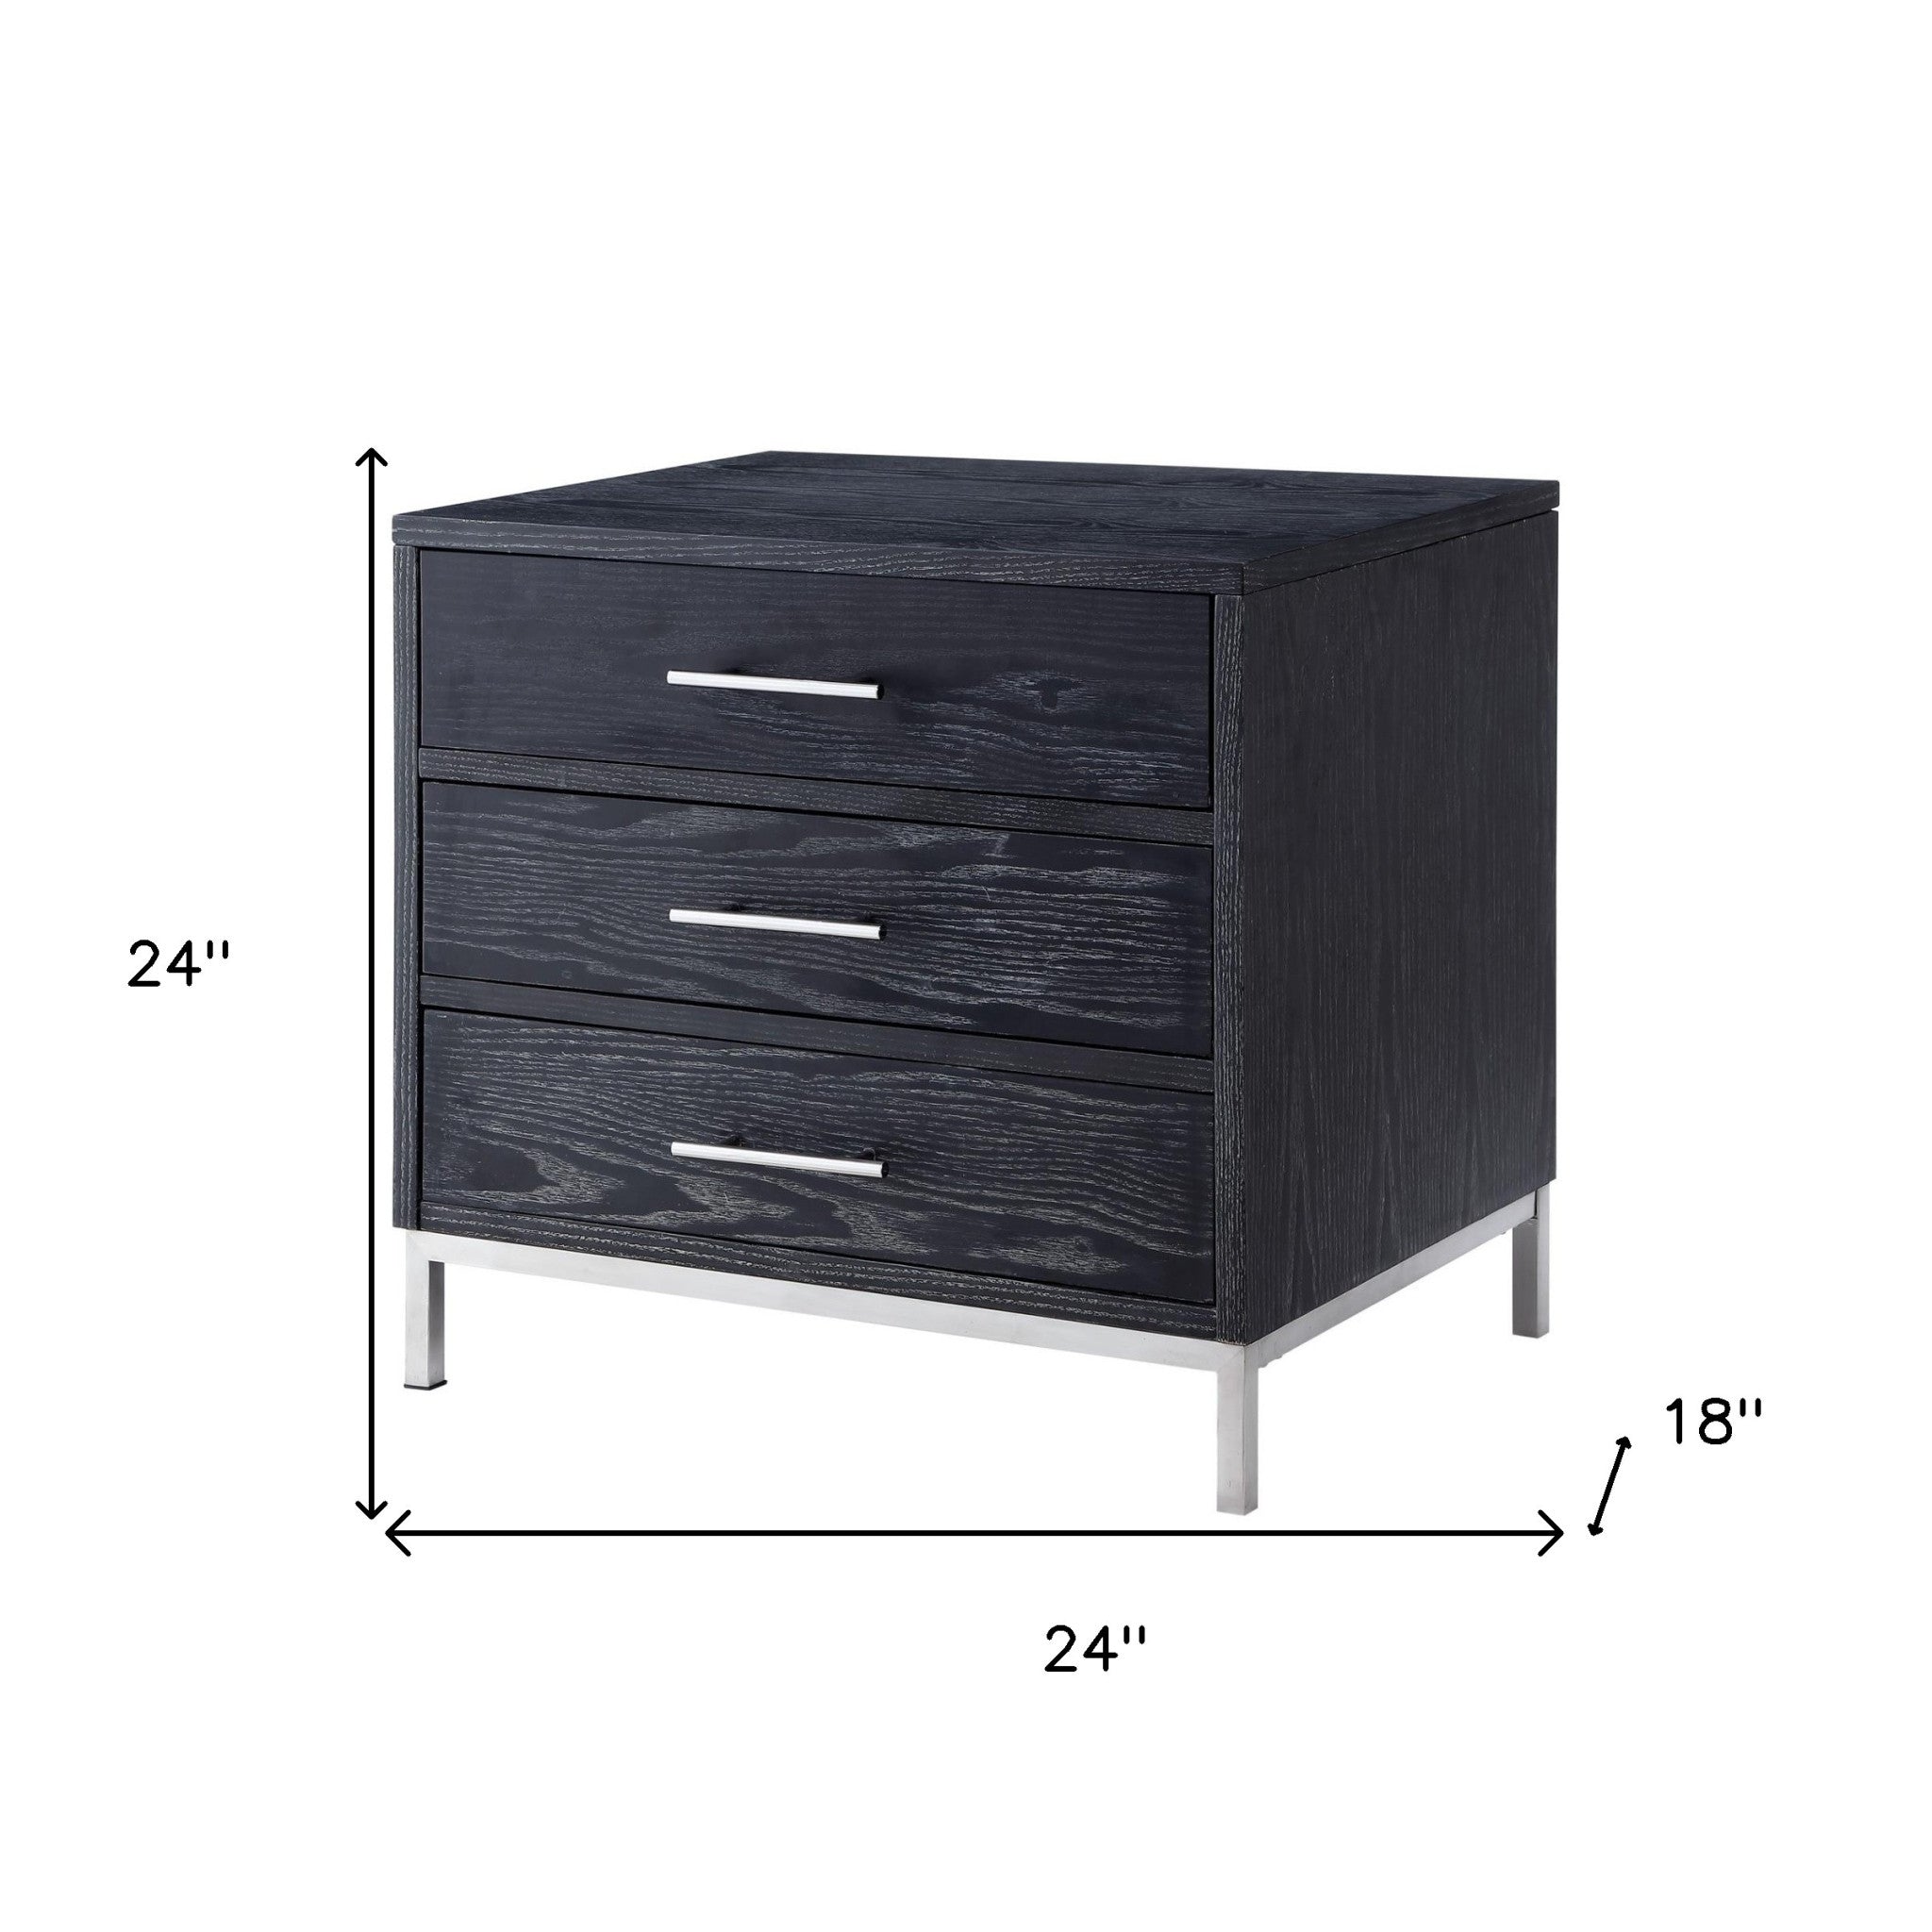 24" Silver Metallic and Black Veneer End Table with Three Drawers